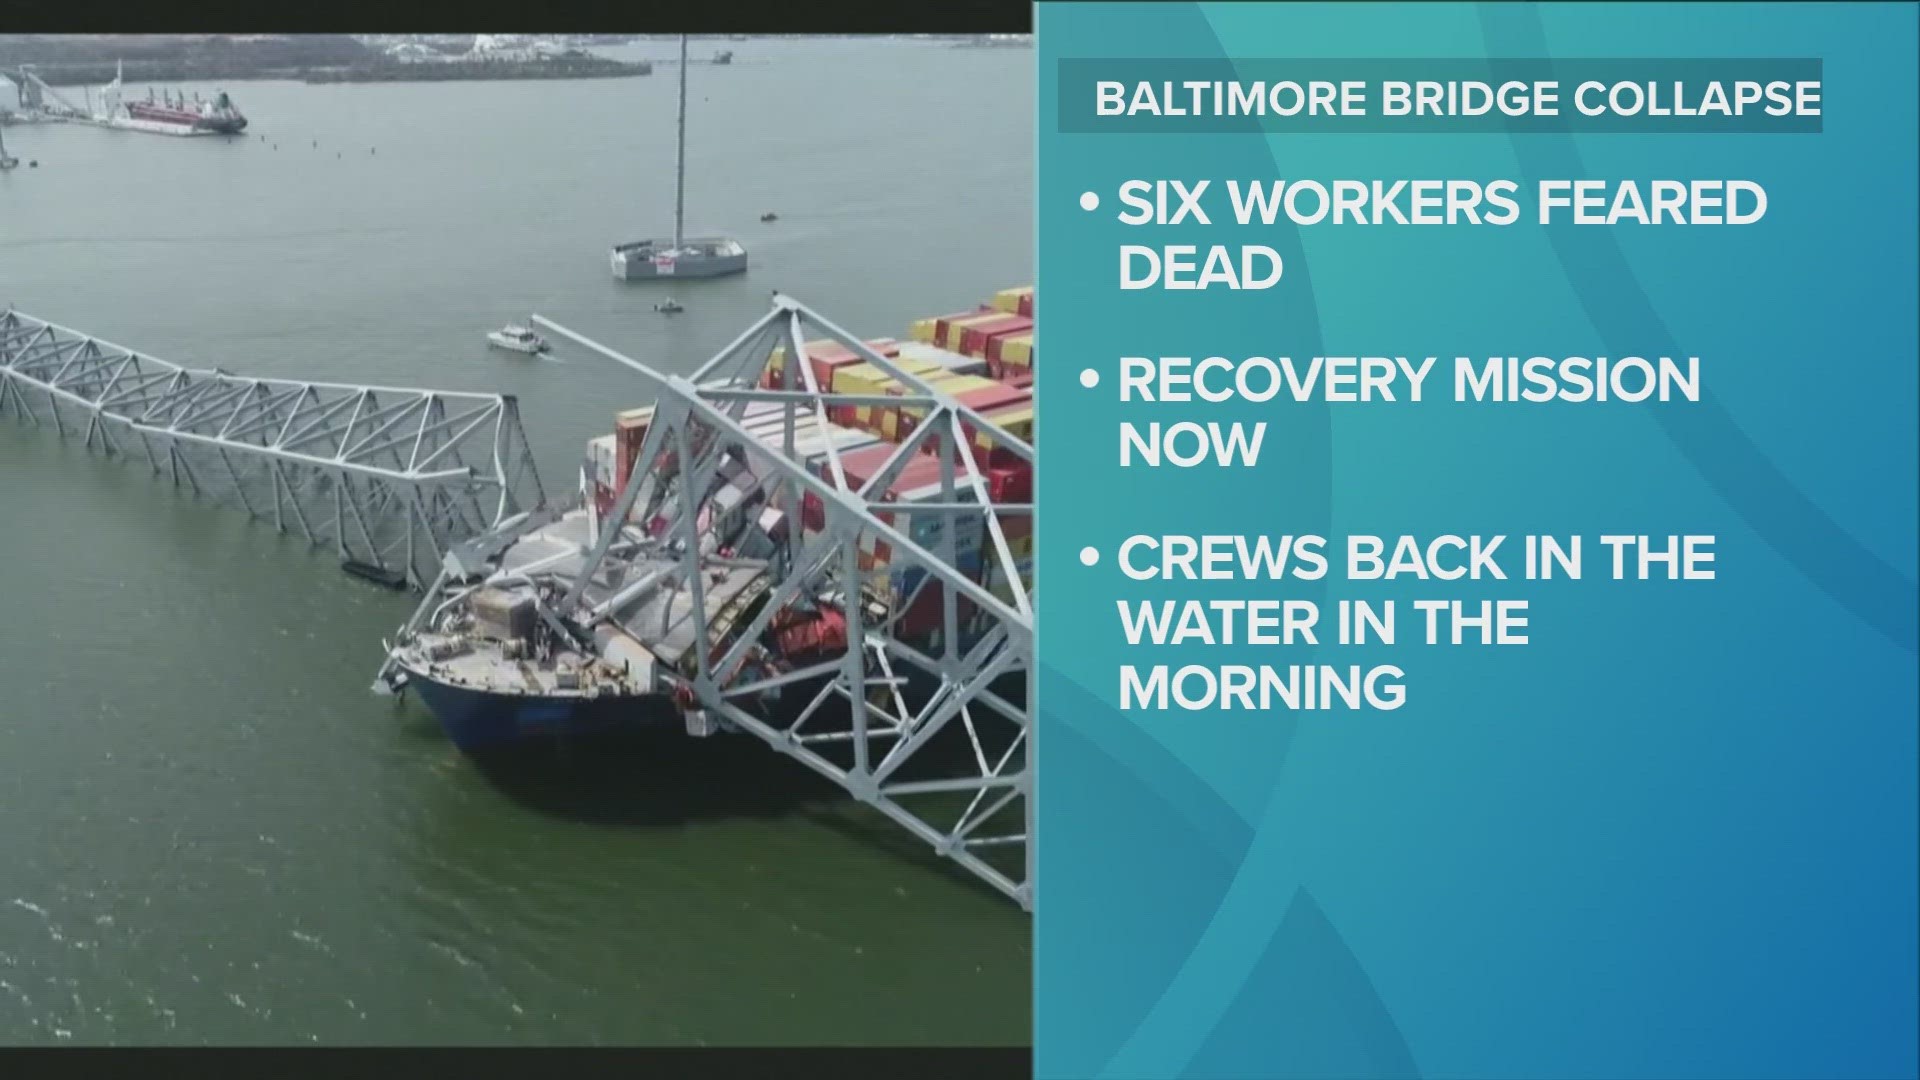 With the ship barreling toward the bridge, authorities had just enough time to stop cars from coming over the bridge, Maryland's governor said.